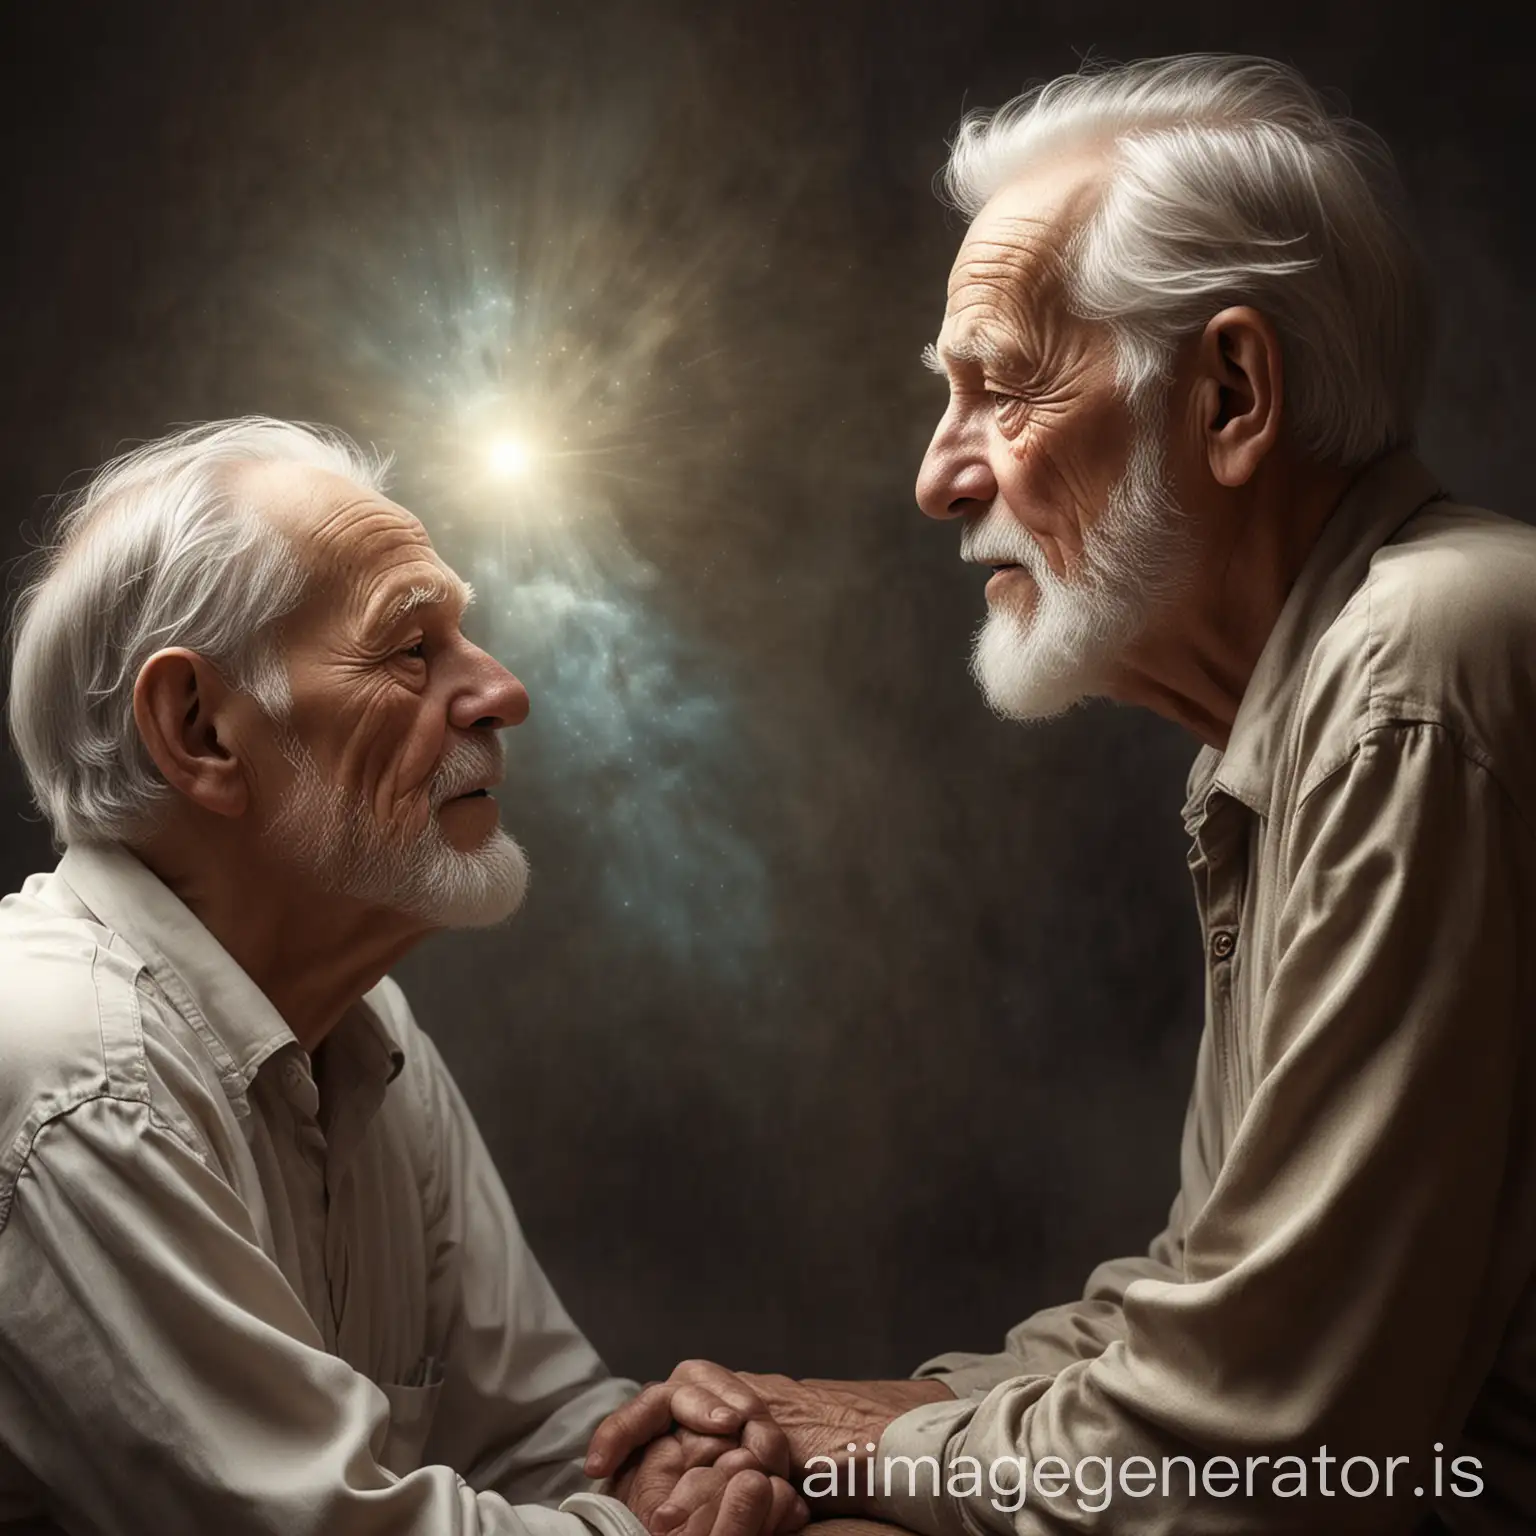 A man named Dream, talking to an old man, Dream is glowing from the head, a realistic image, Dream looks wise